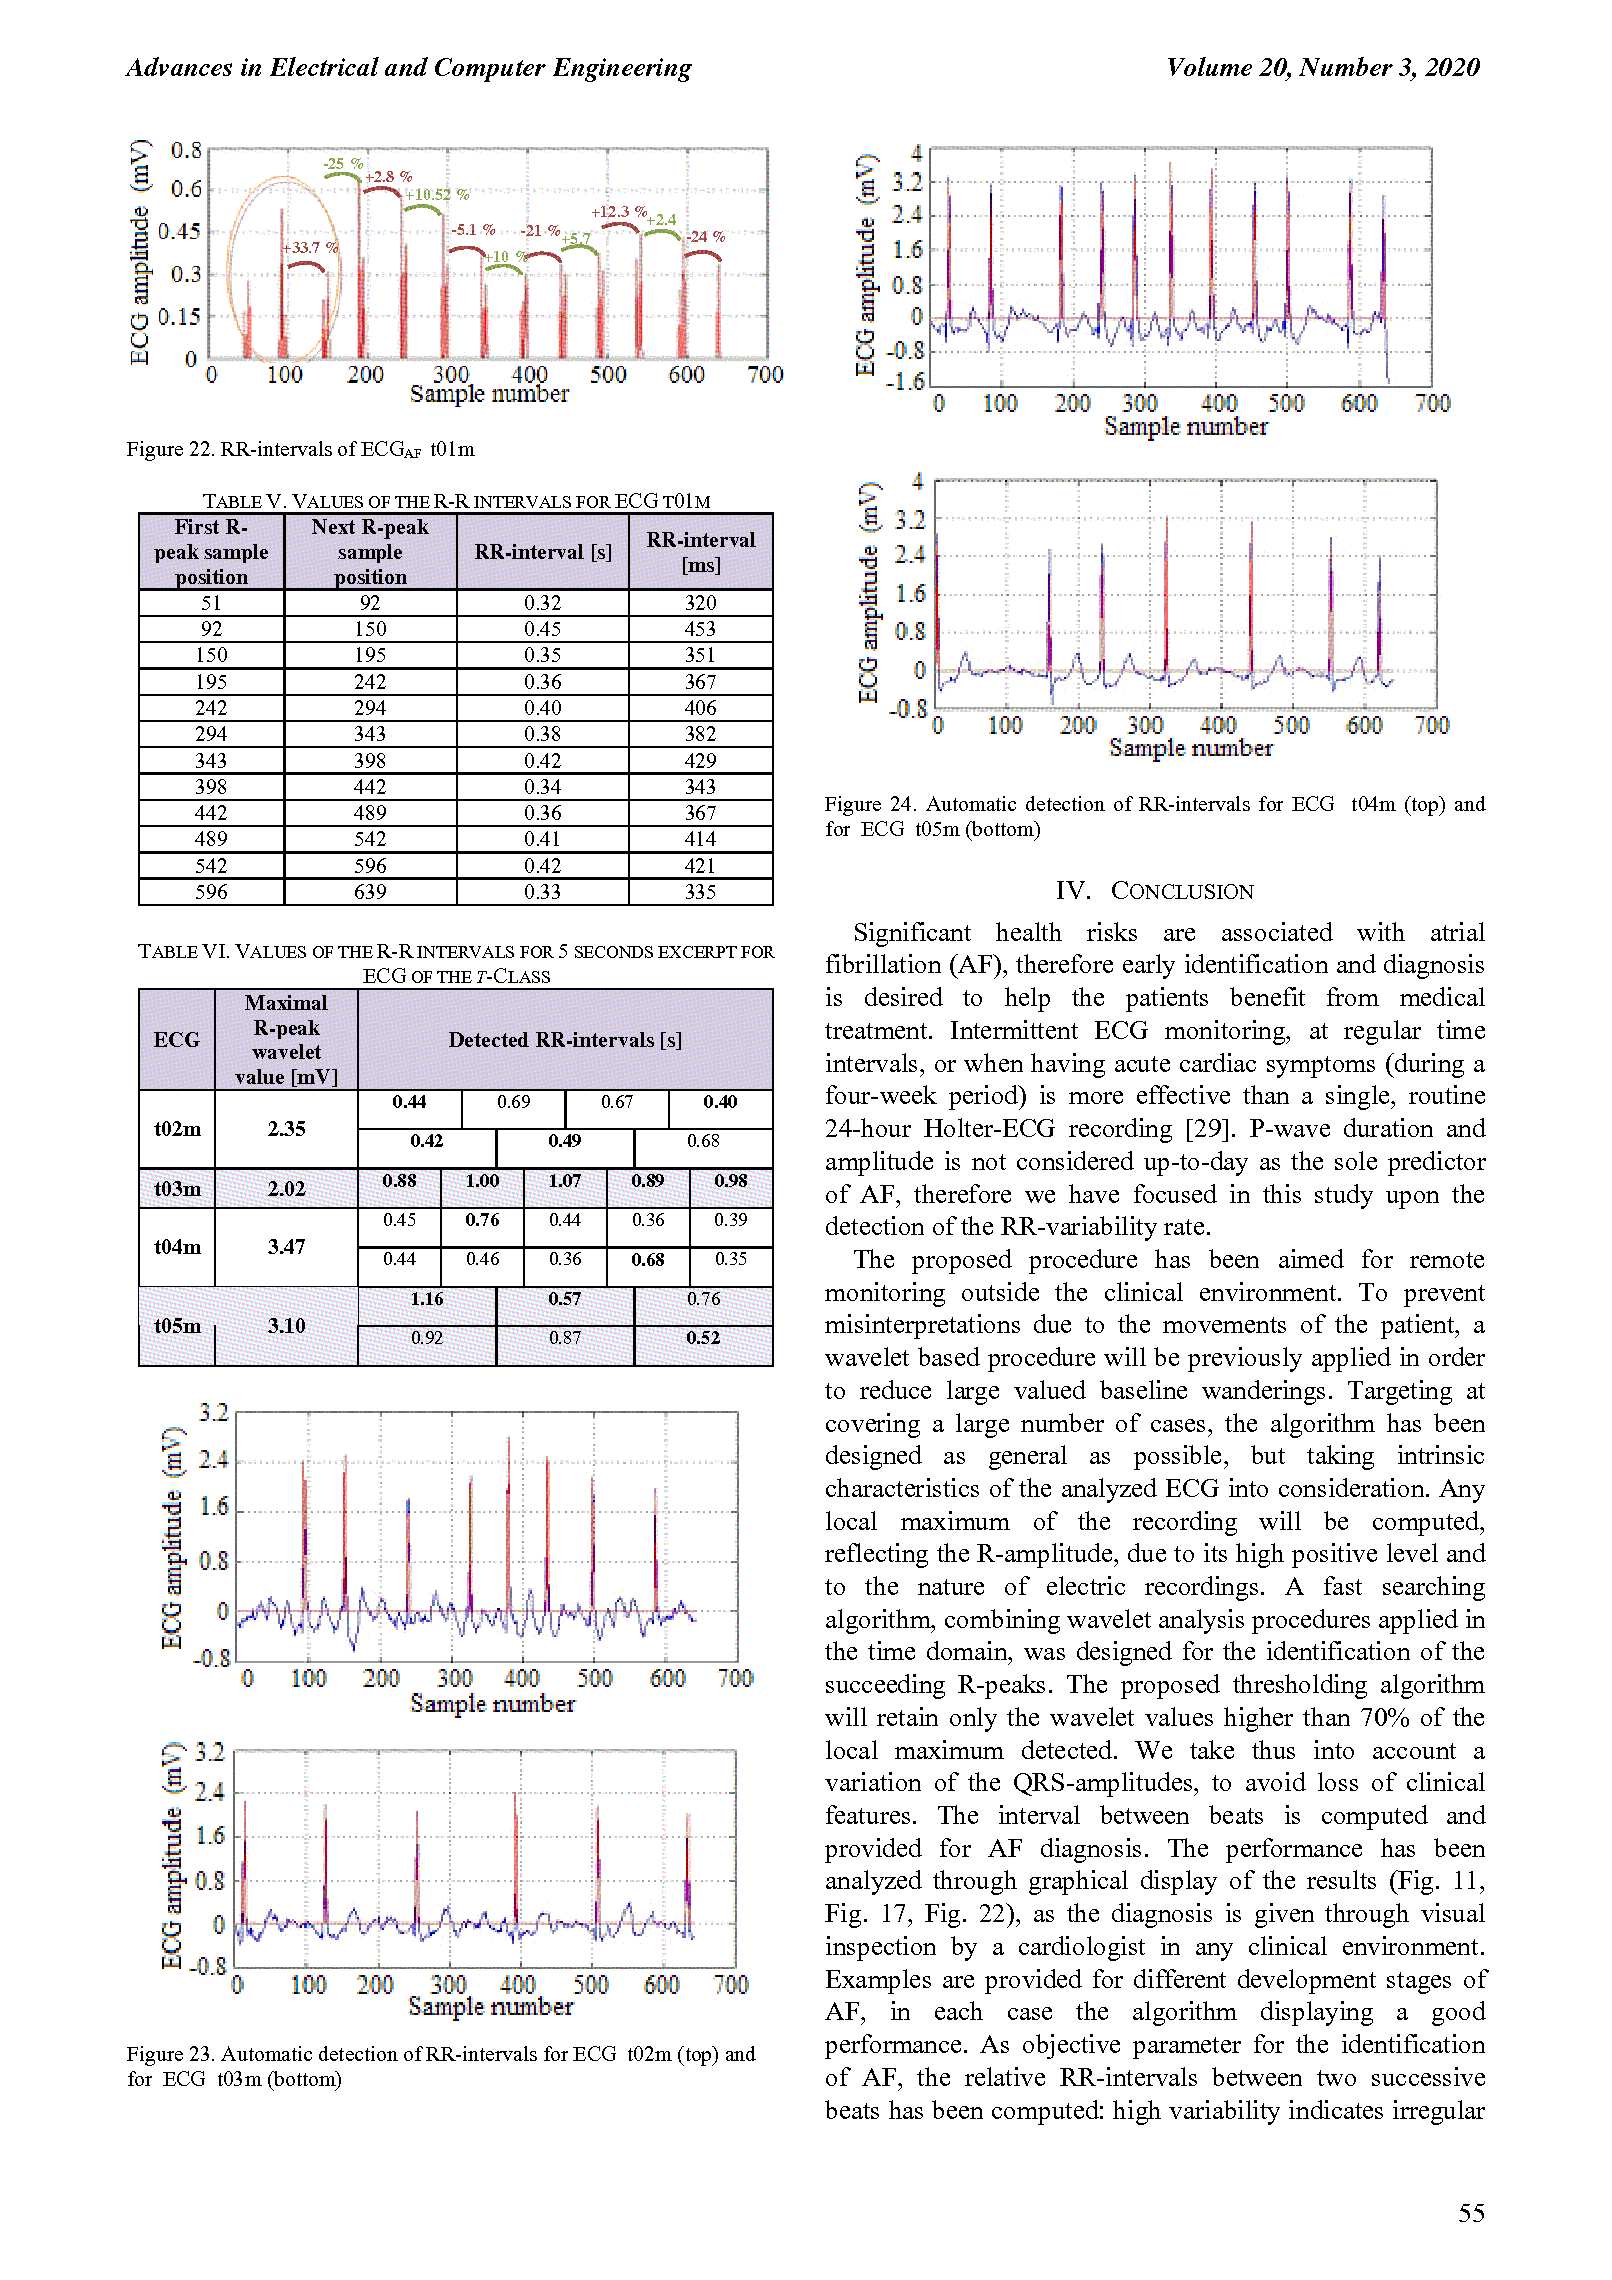 PDF Quickview for paper with DOI:10.4316/AECE.2020.03006